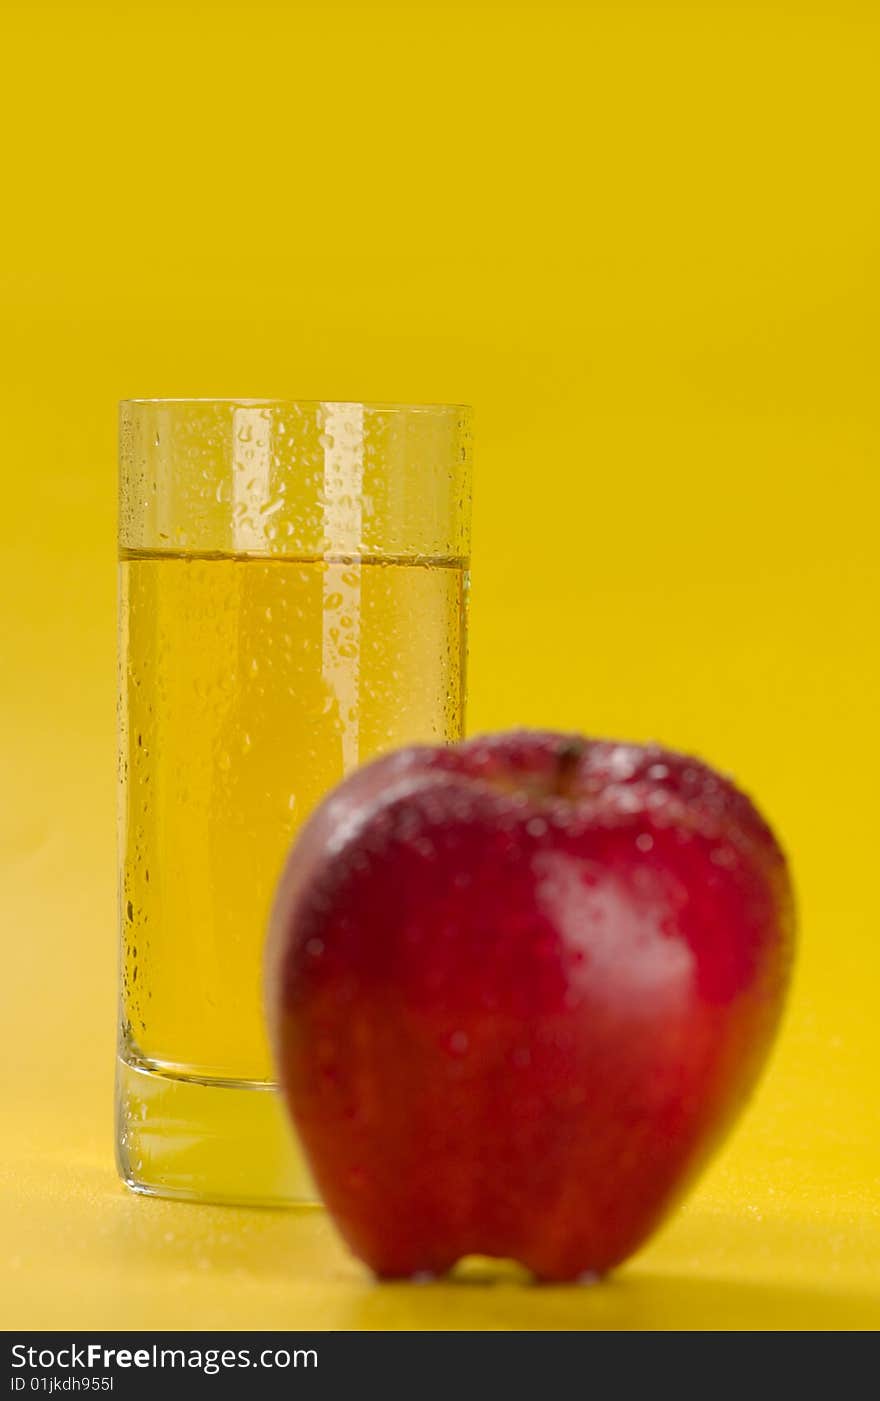 The big red apple and glass of apple juice on a yellow background. The big red apple and glass of apple juice on a yellow background